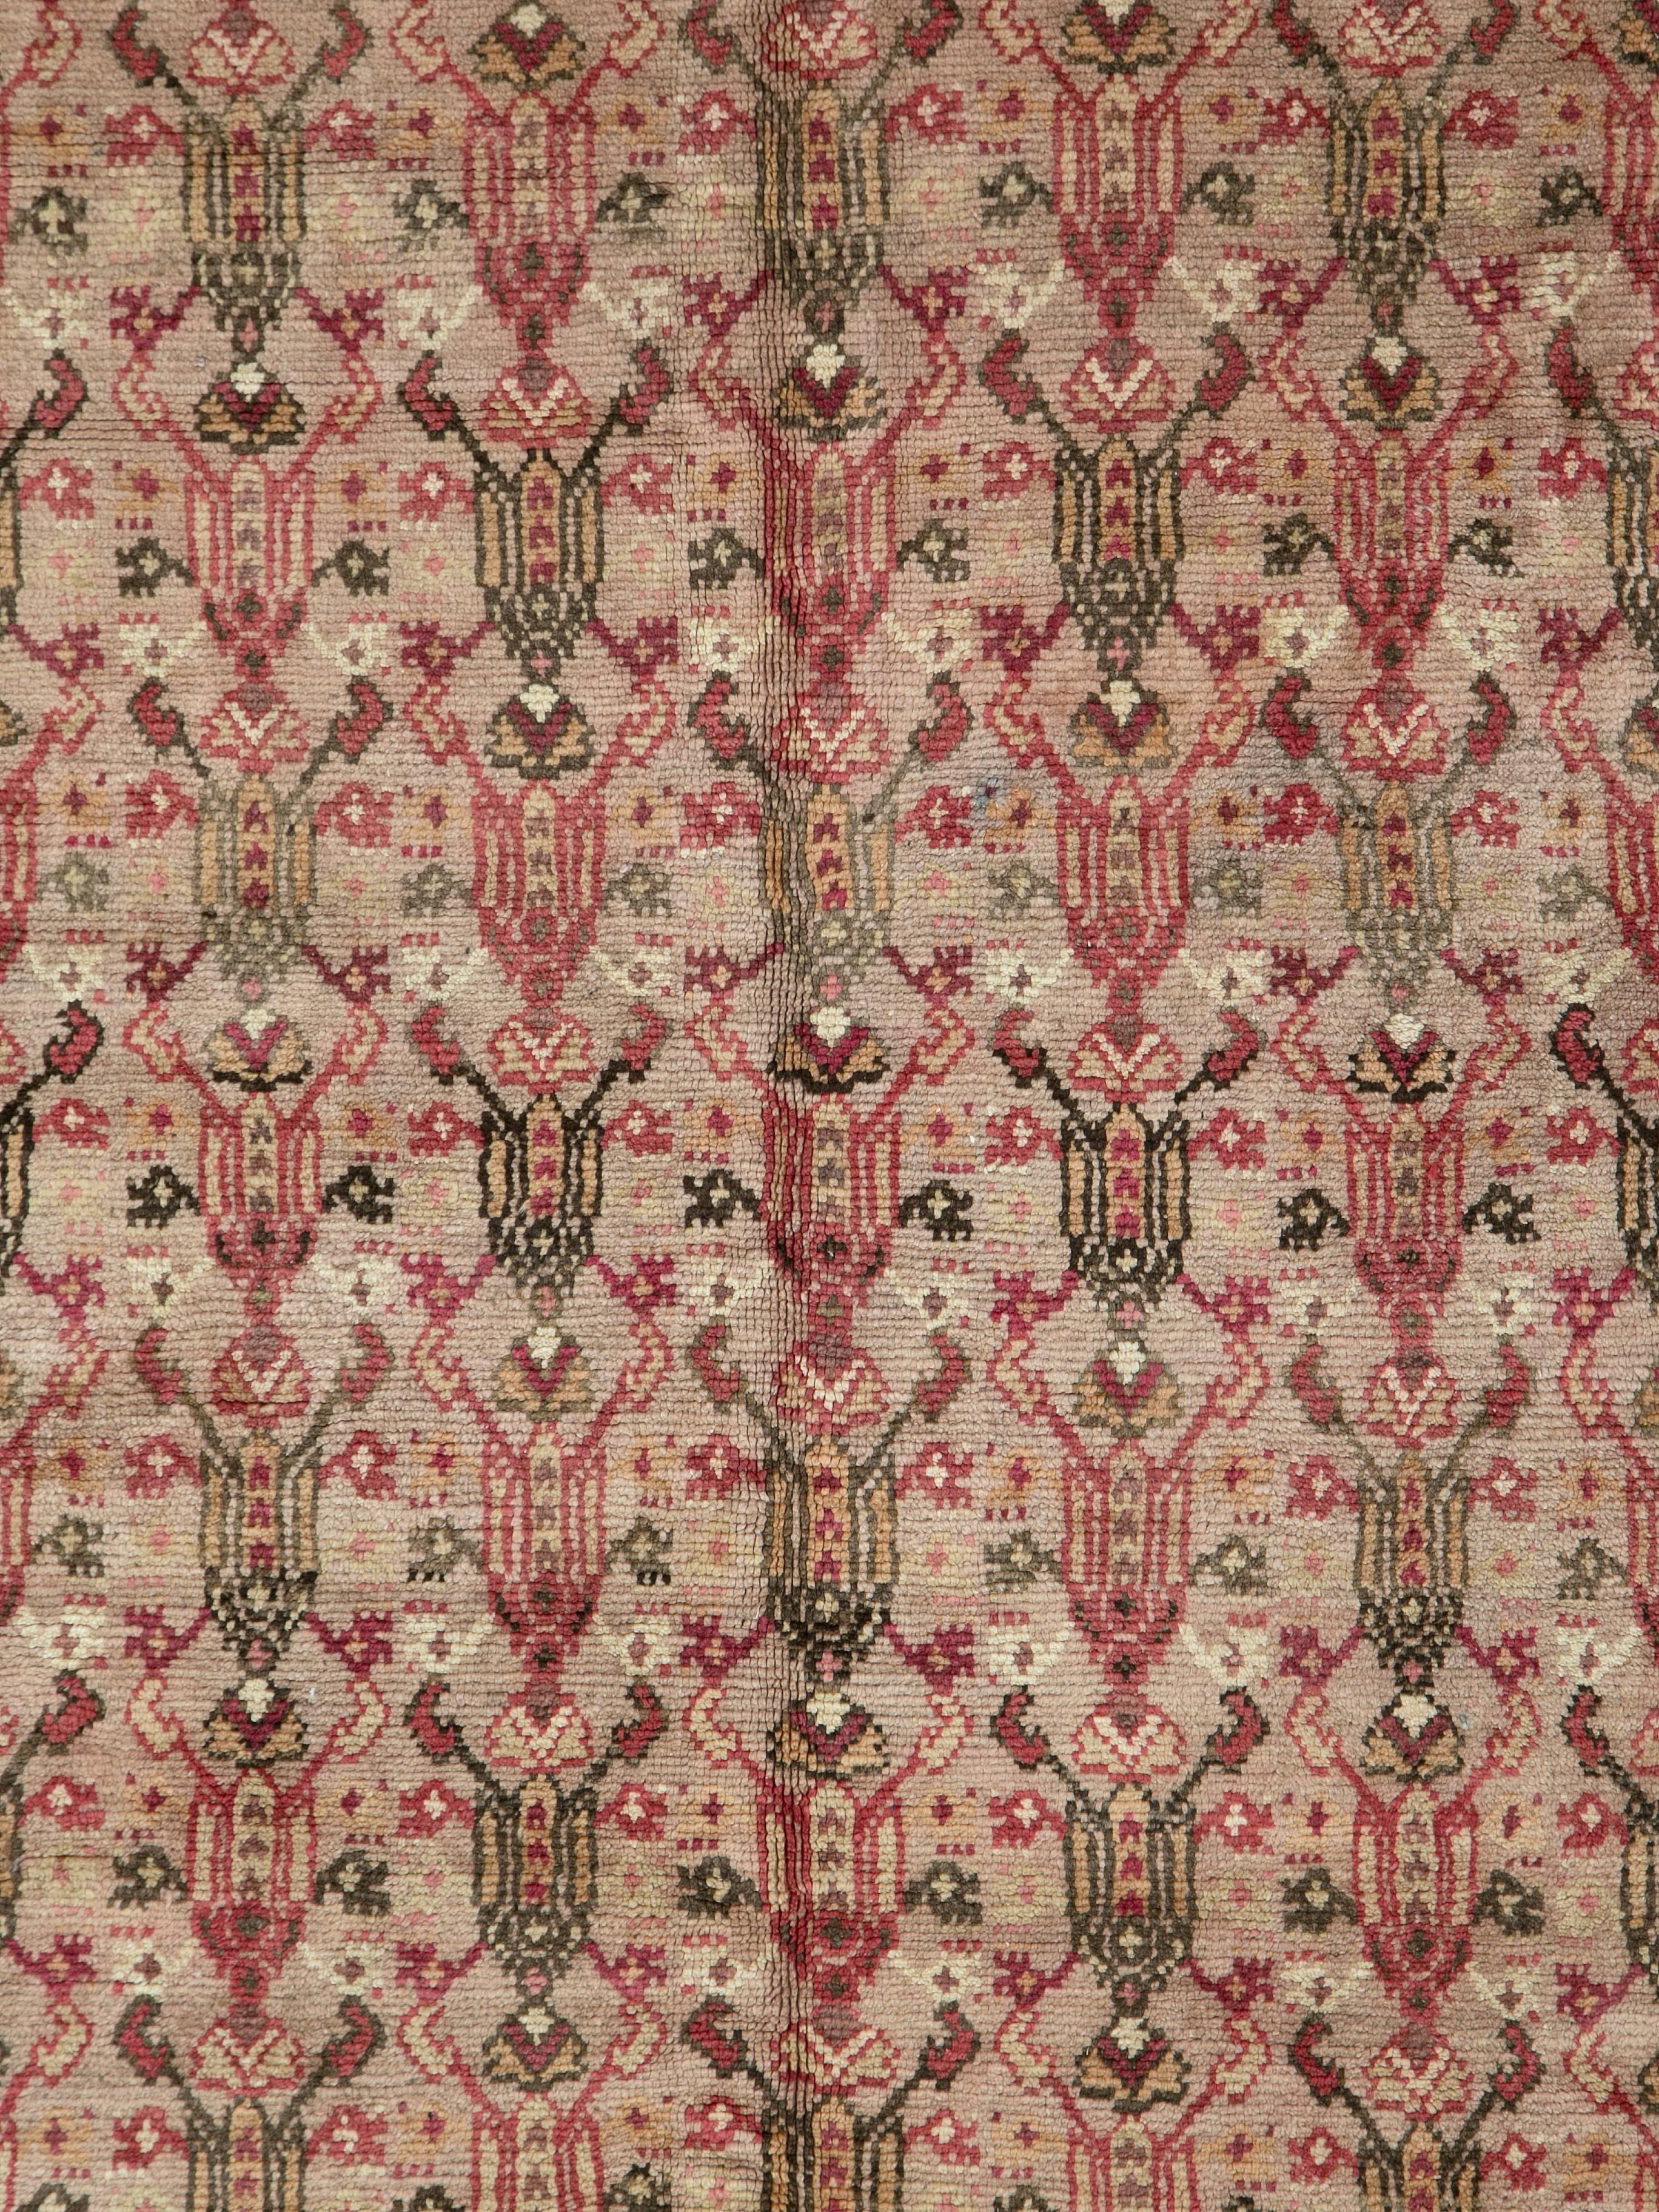 A vintage Turkish Sivas carpet from the second quarter of the 20th century.